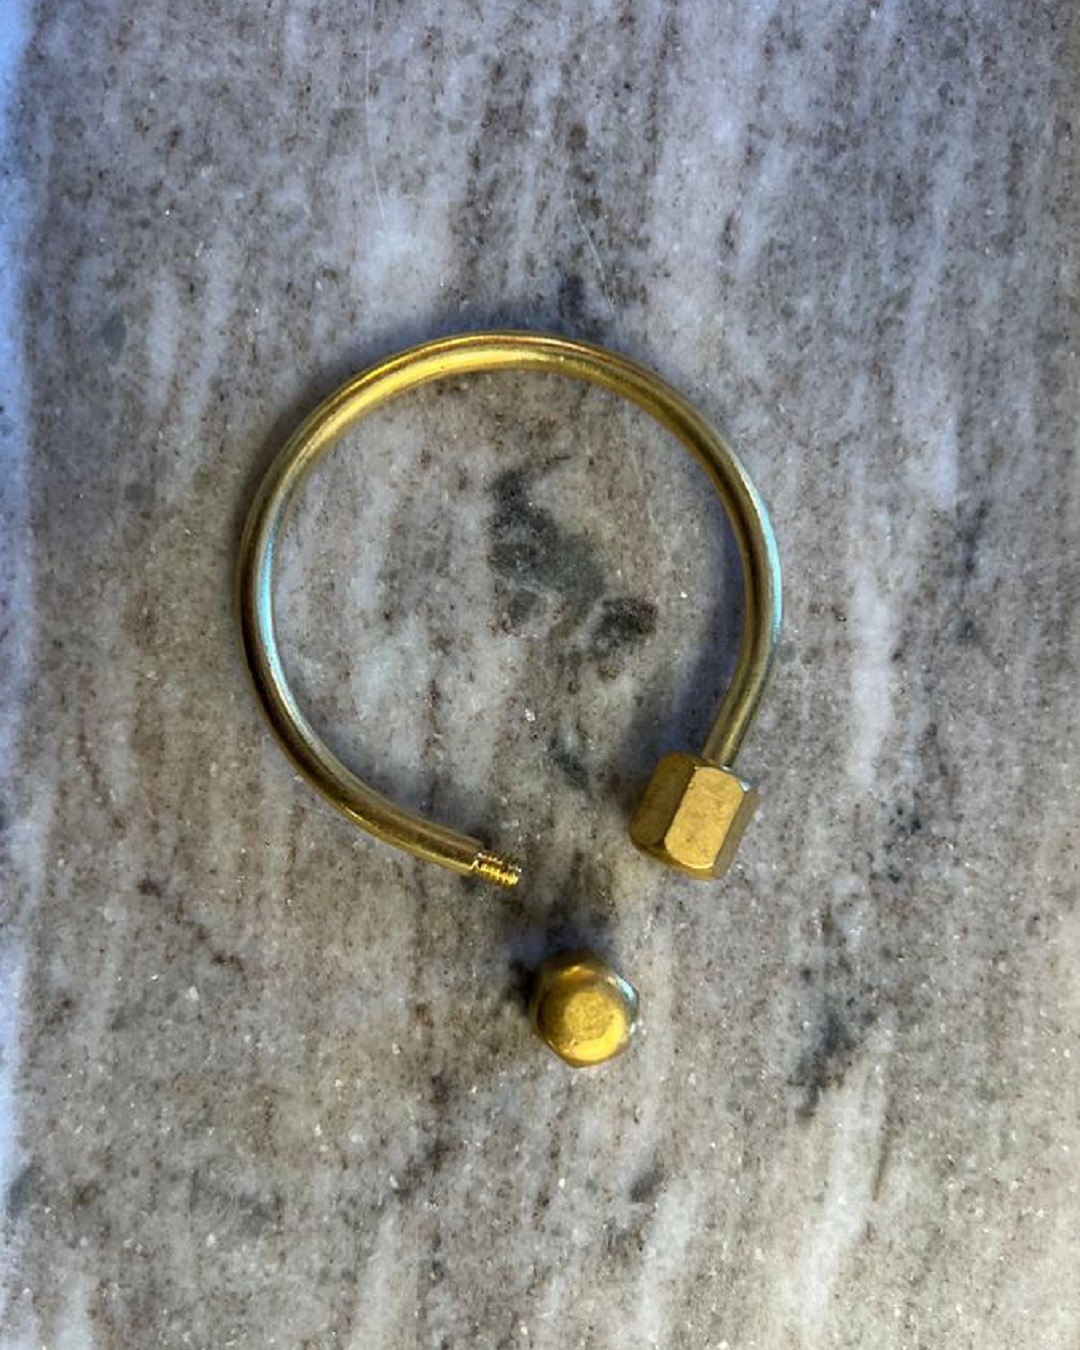 Brass keyring with one end unscrewed